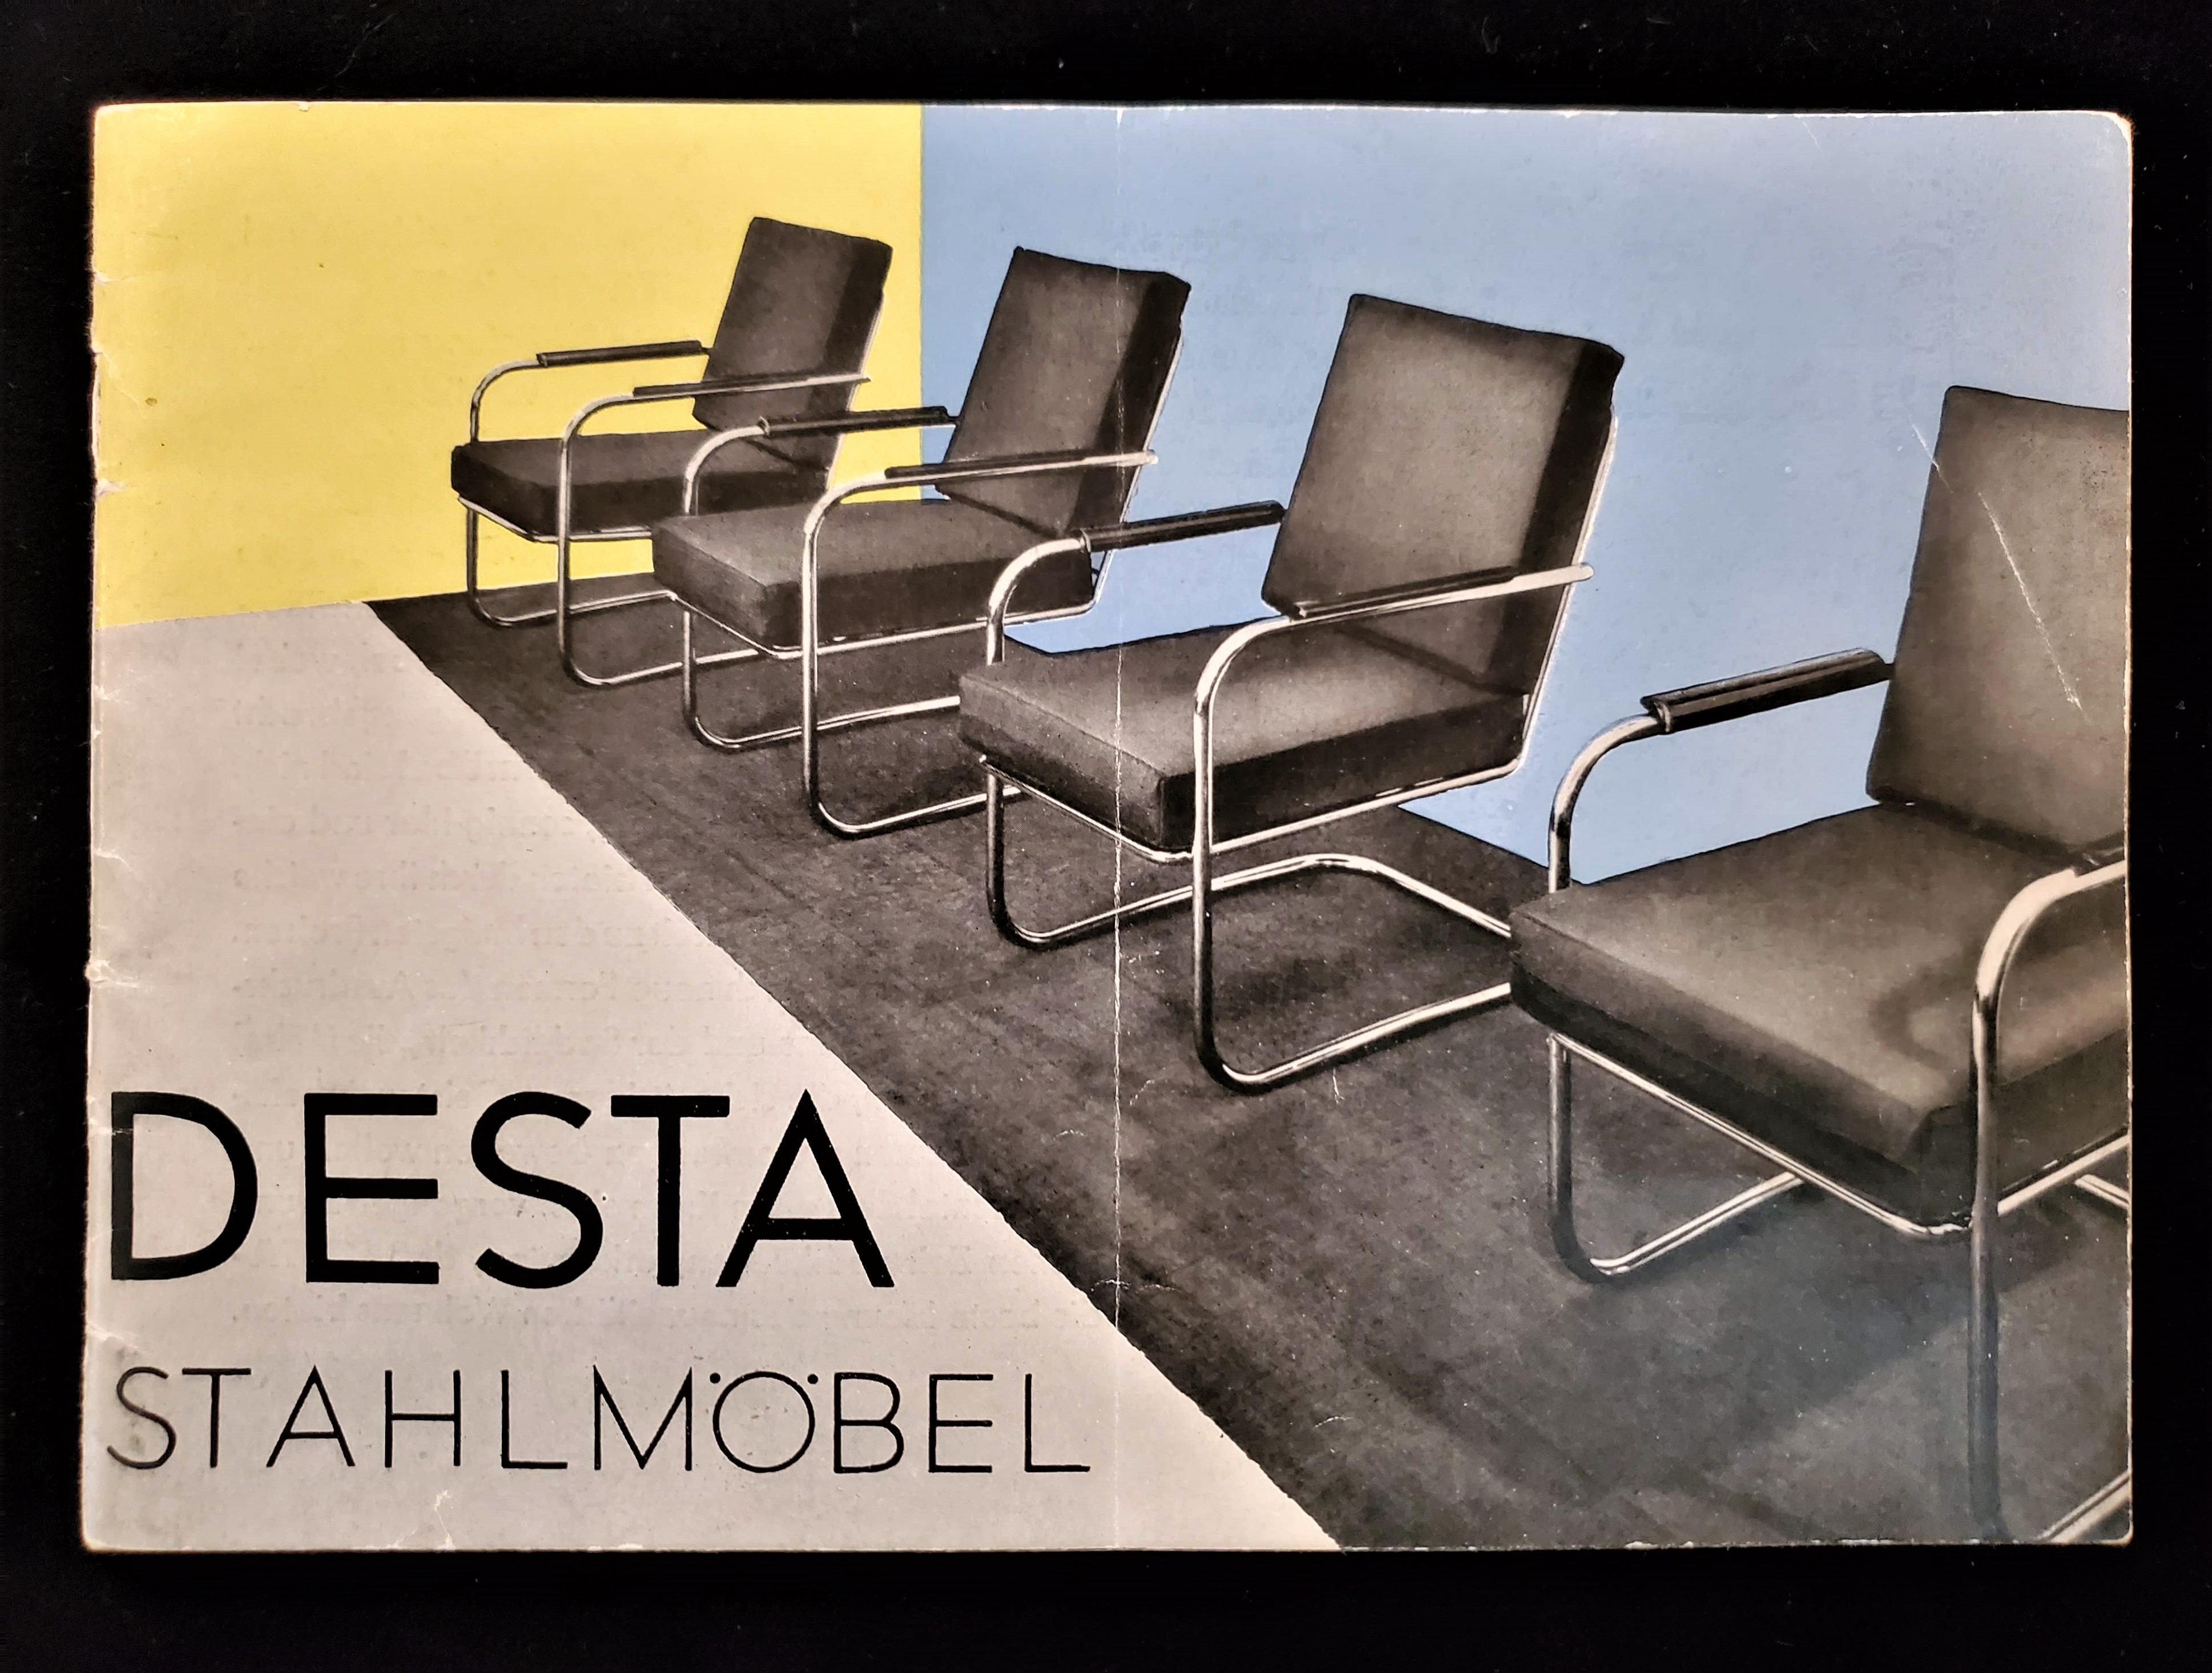 Image features the Desta Stahlmöbel book cover showing a photomontage of tubular steel club chairs on a yellow and light blue background. Please scroll down to read the blog post about this object.